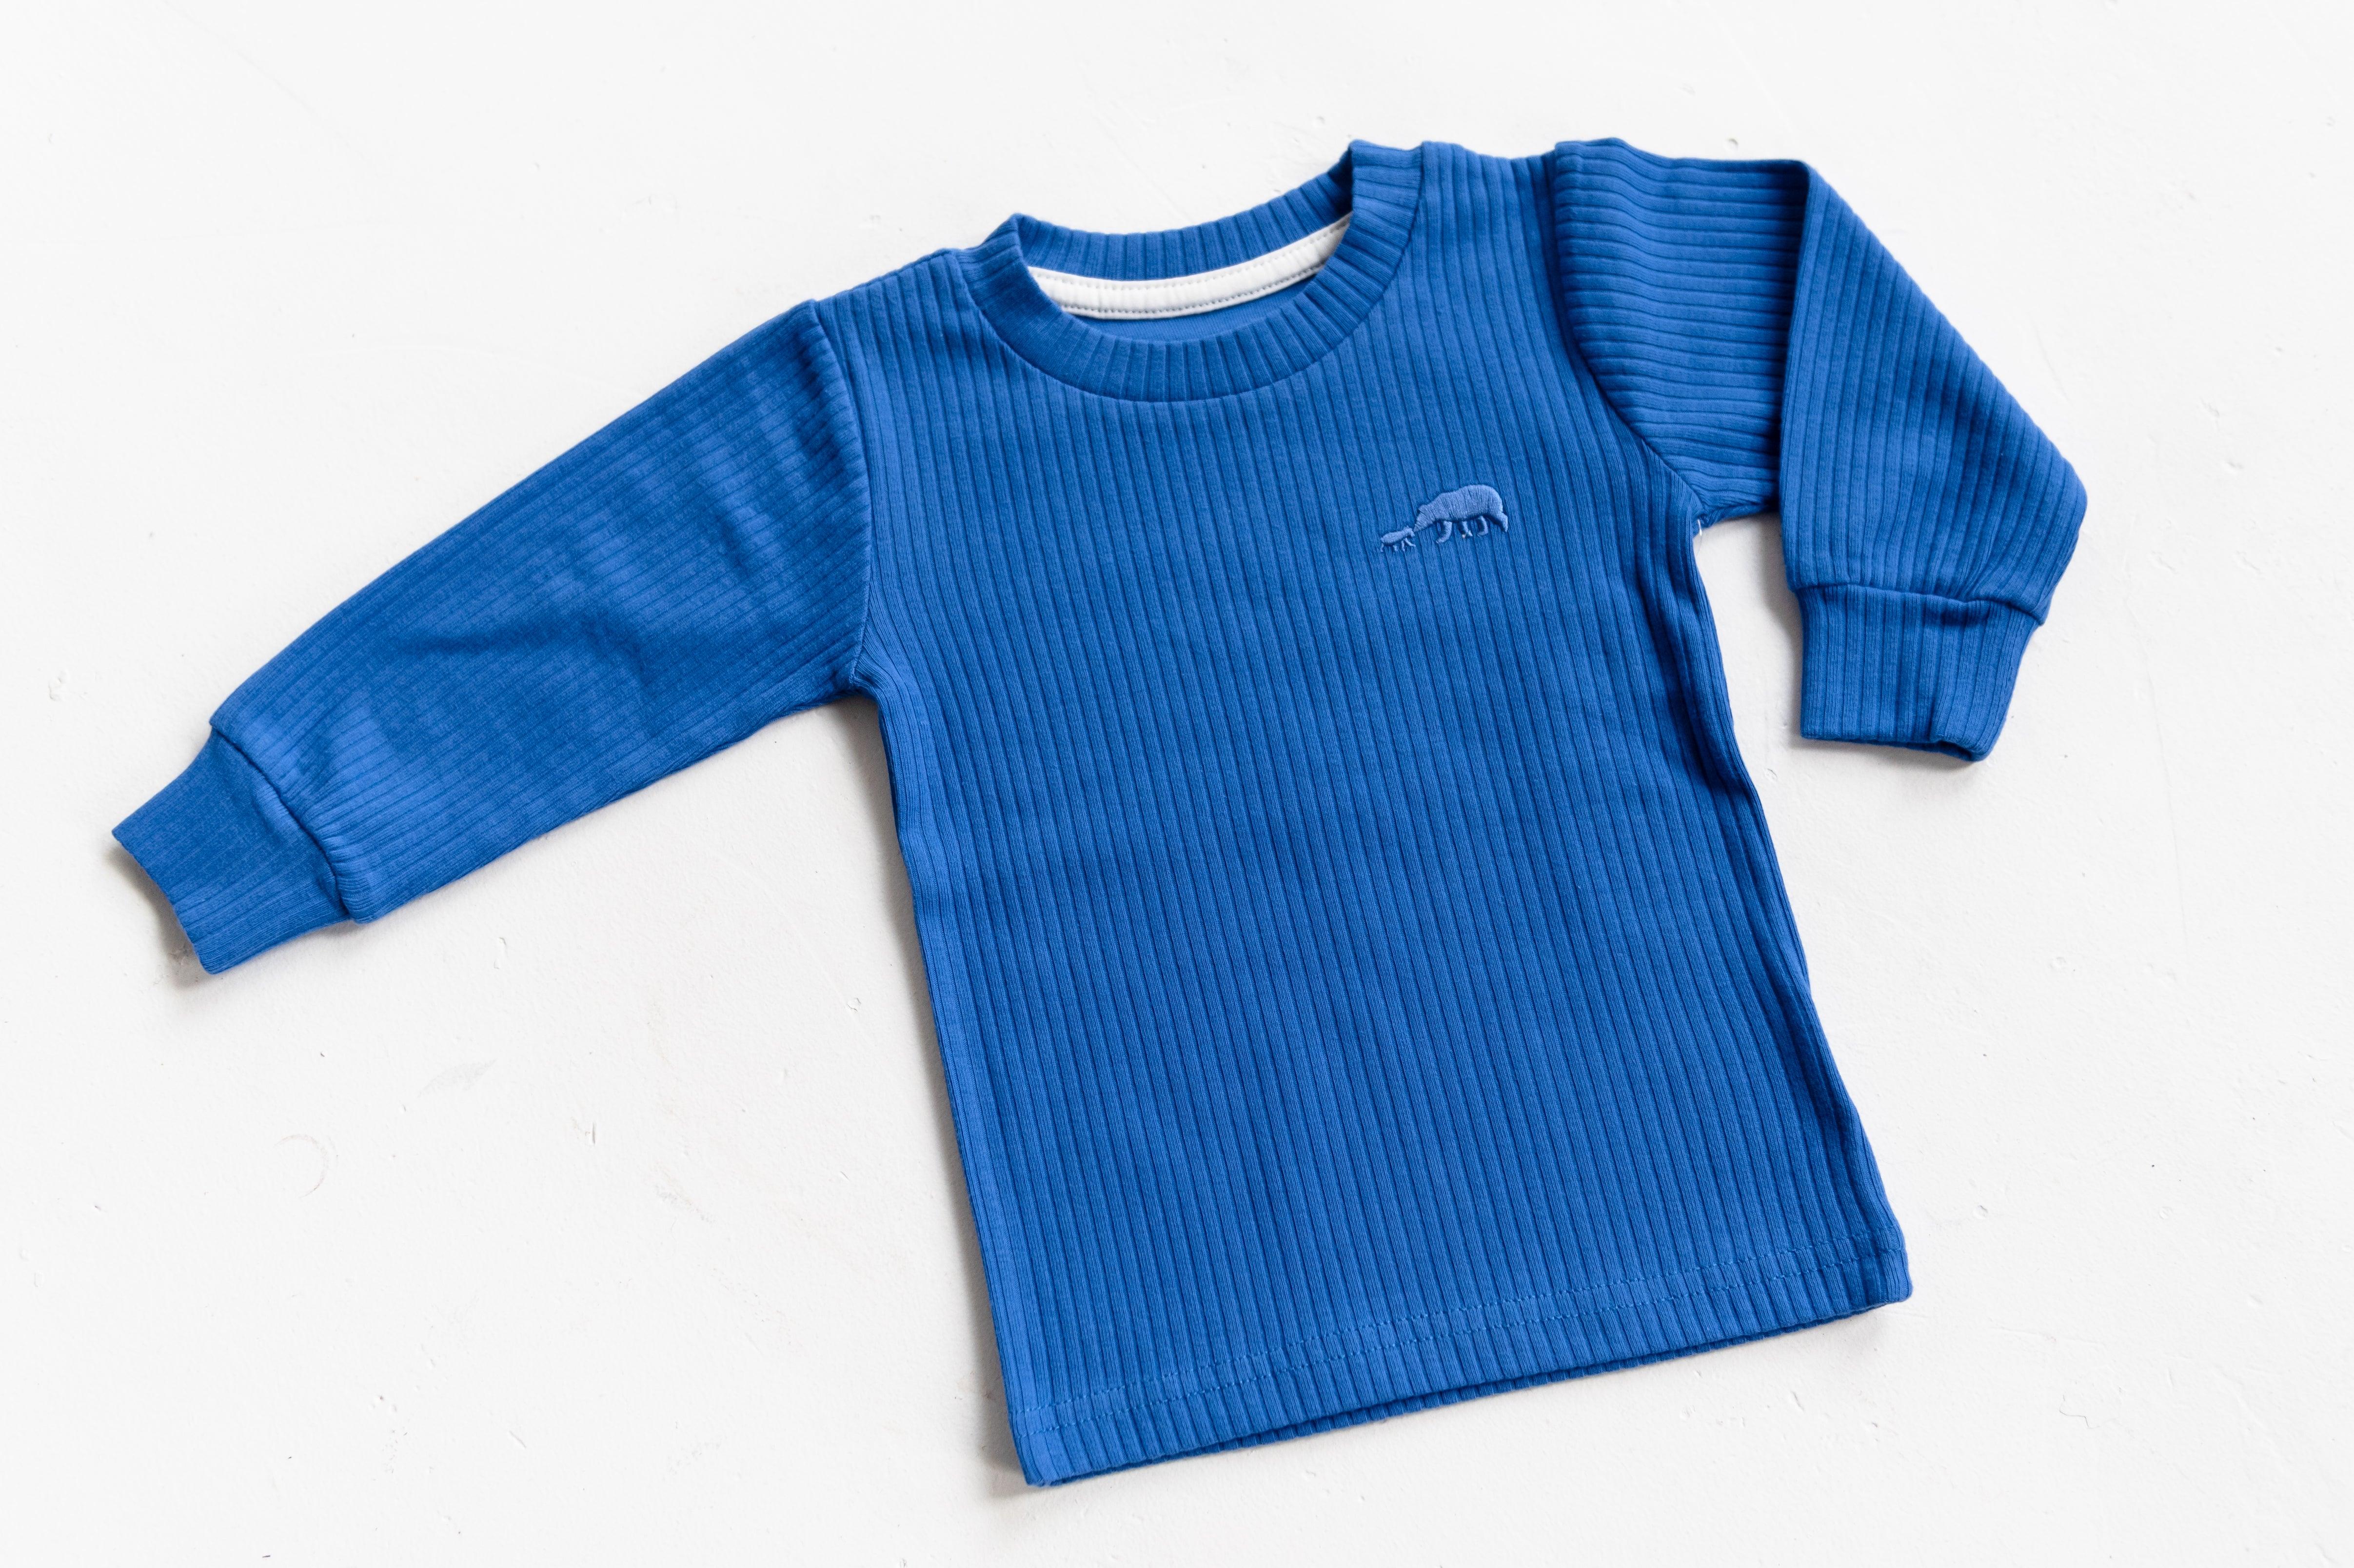 files/bright-blue-ribbed-long-sleeve-top-claybearofficial-2.jpg